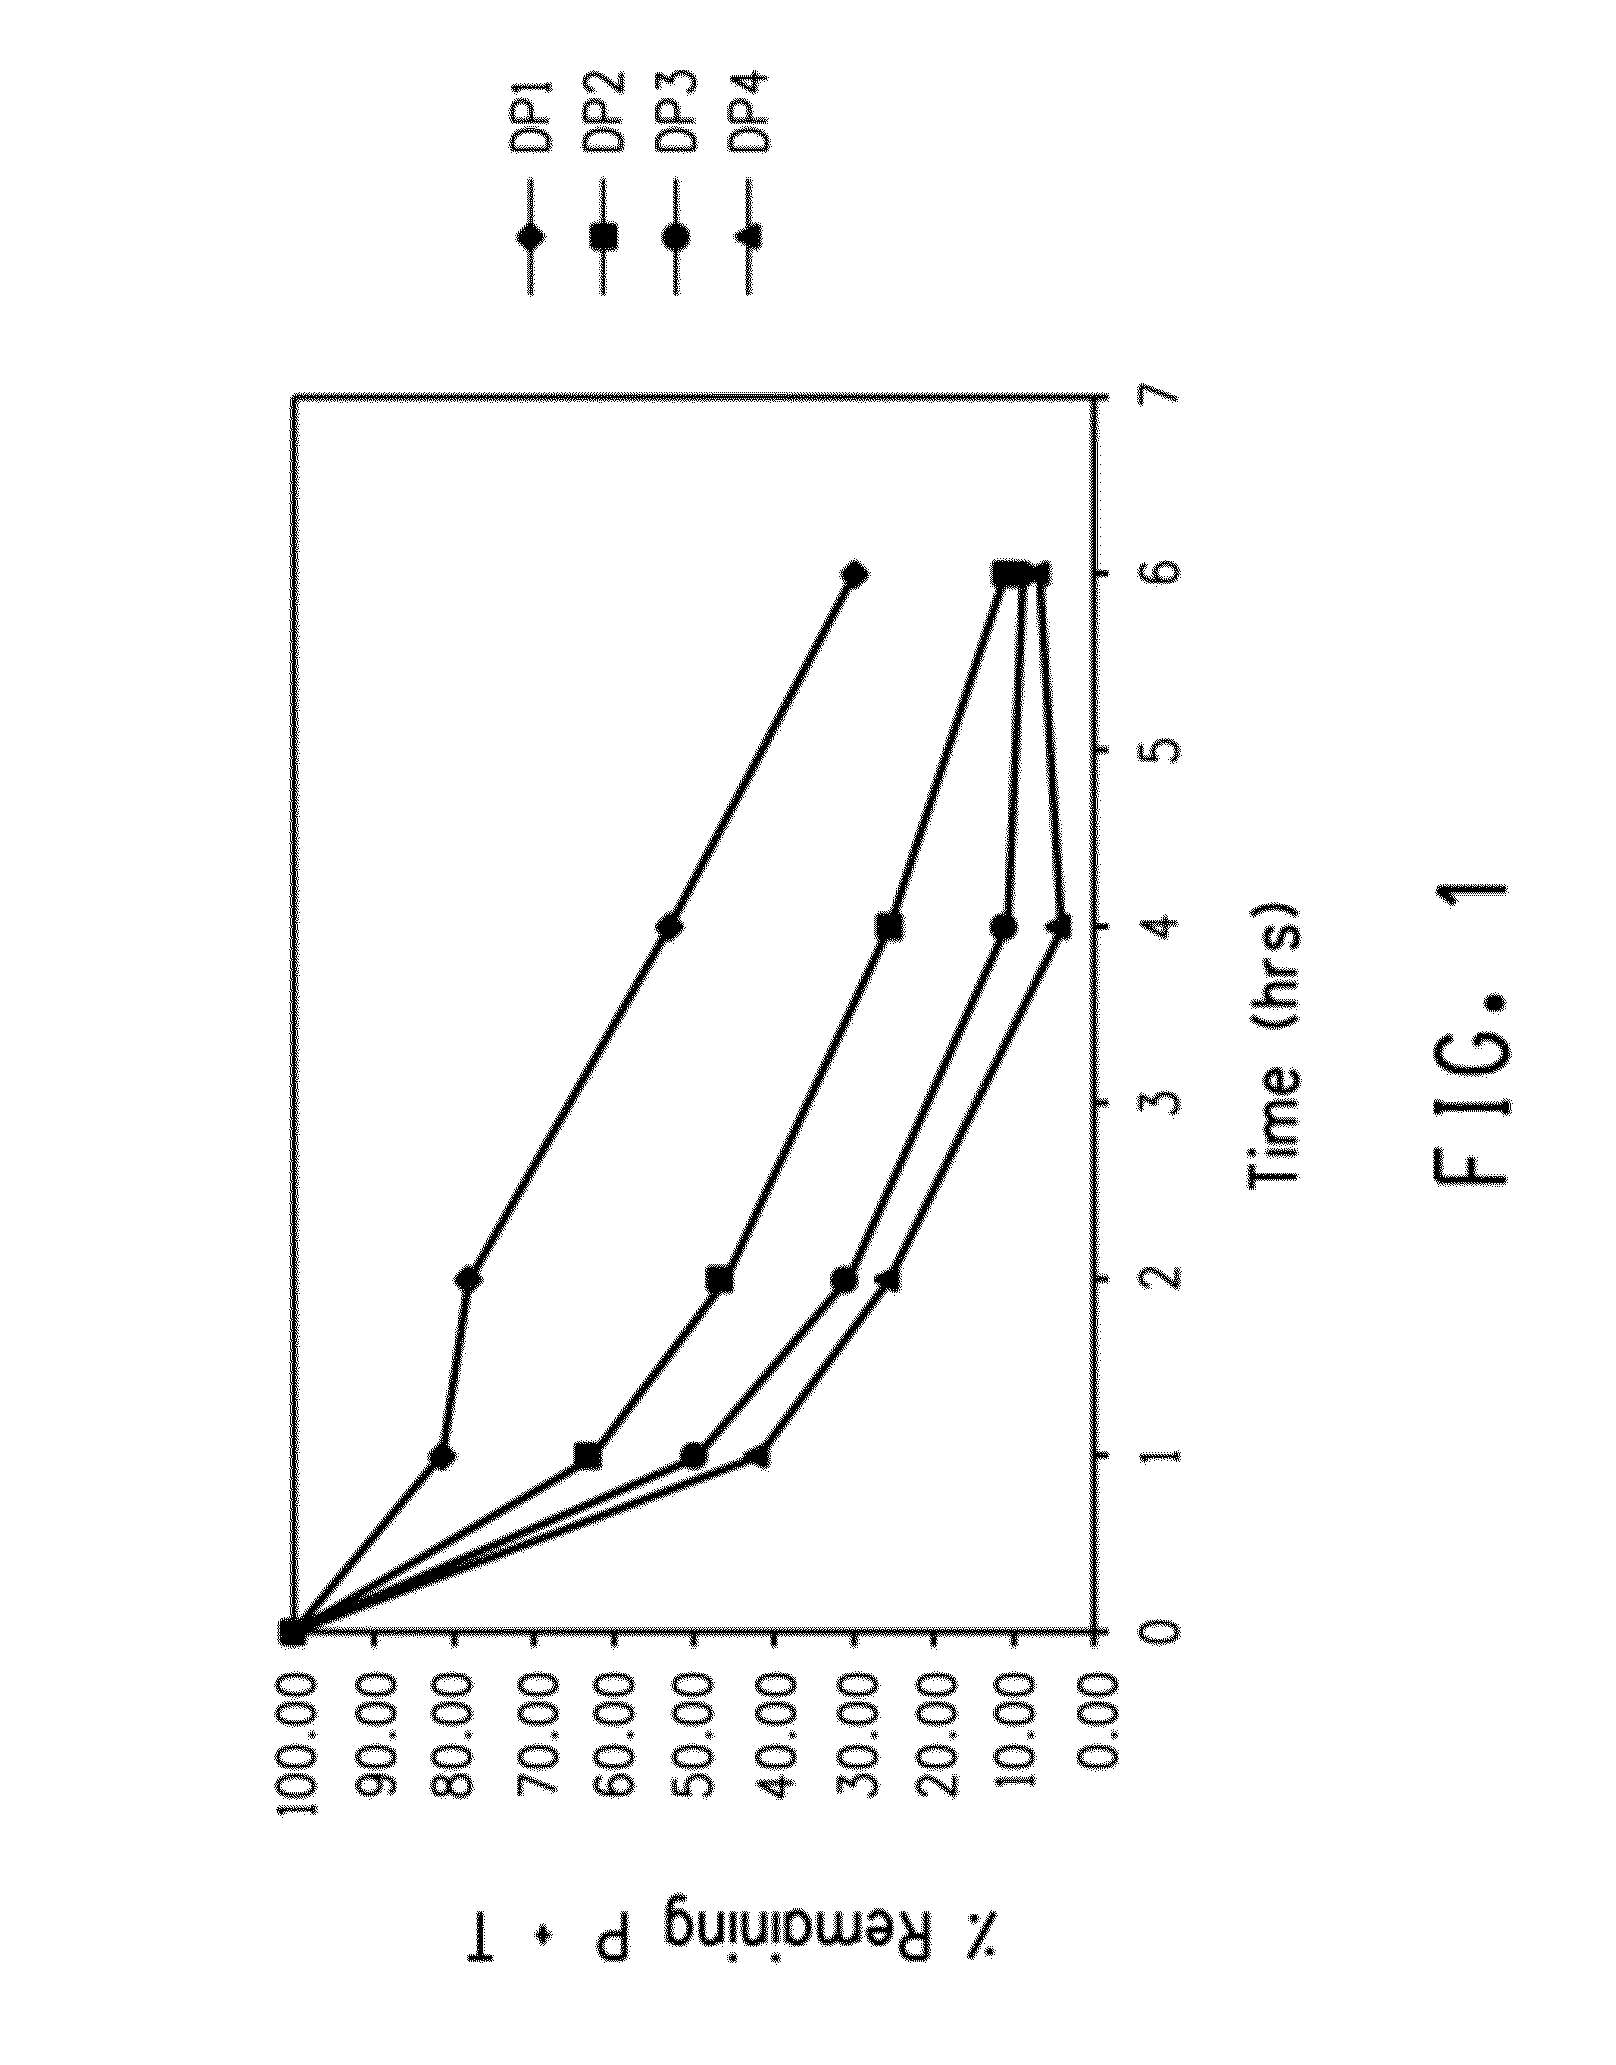 Acid-cleavable linkers exhibiting altered rates of acid hydrolysis